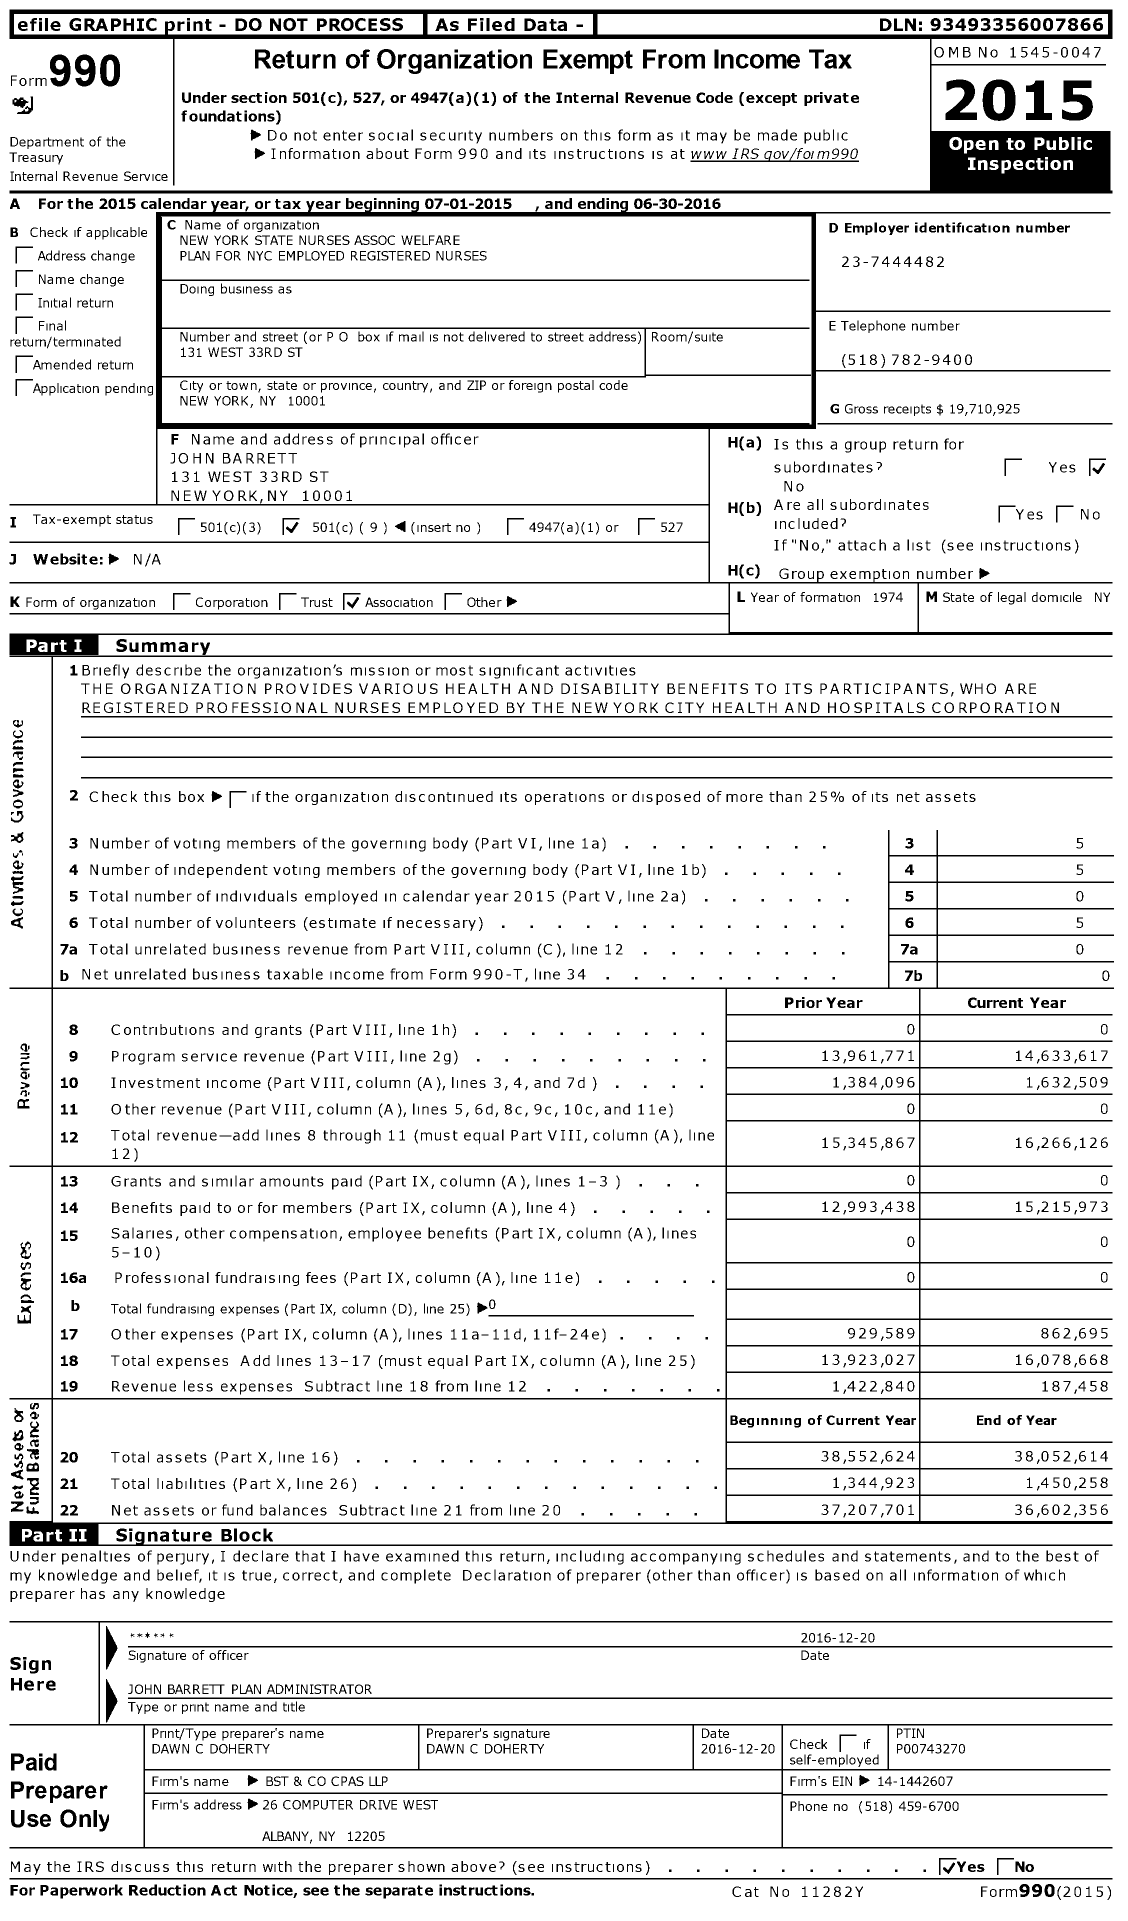 Image of first page of 2015 Form 990O for New York State Nurses Association Welfare Plan for Nyc Employed Registered Nurses